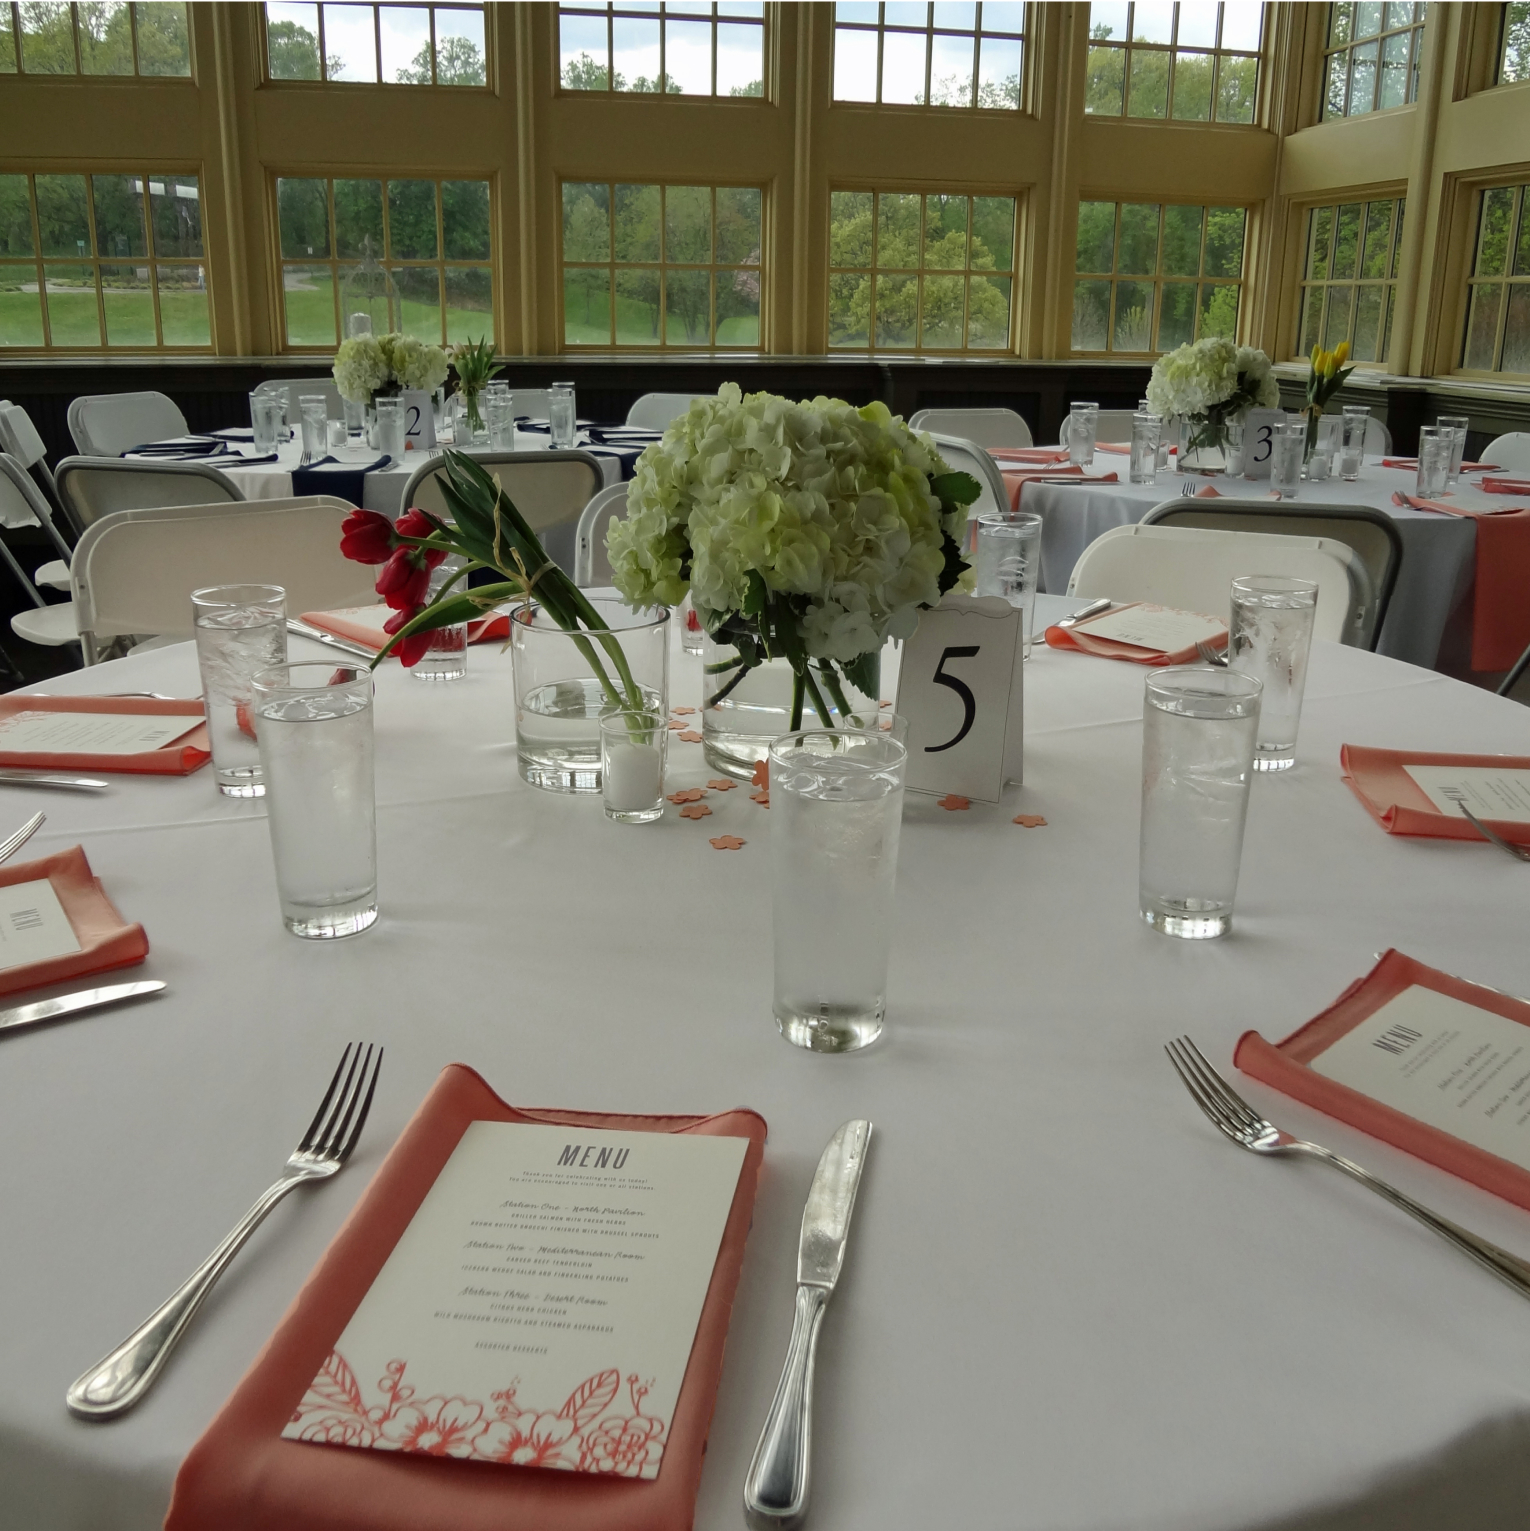 The South Pavilion set for seated dinner with white linens on round tables and floral centerpieces